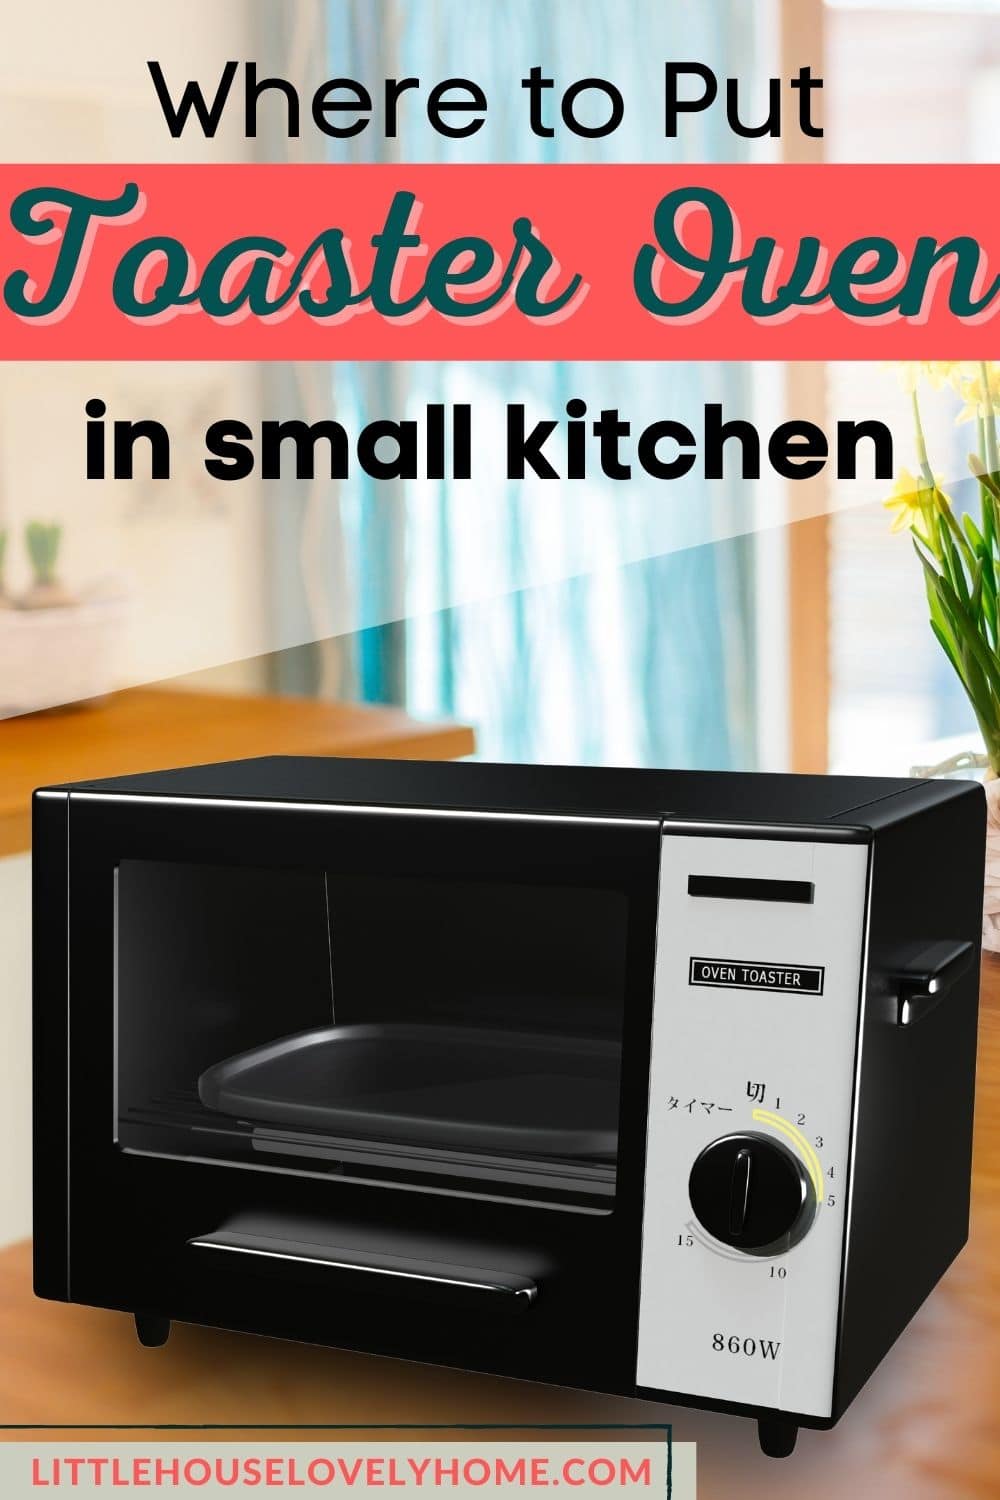 Image of toaster oven in the kitchen counter with a text overlay that reads Where to put oven toaster in small kitchen